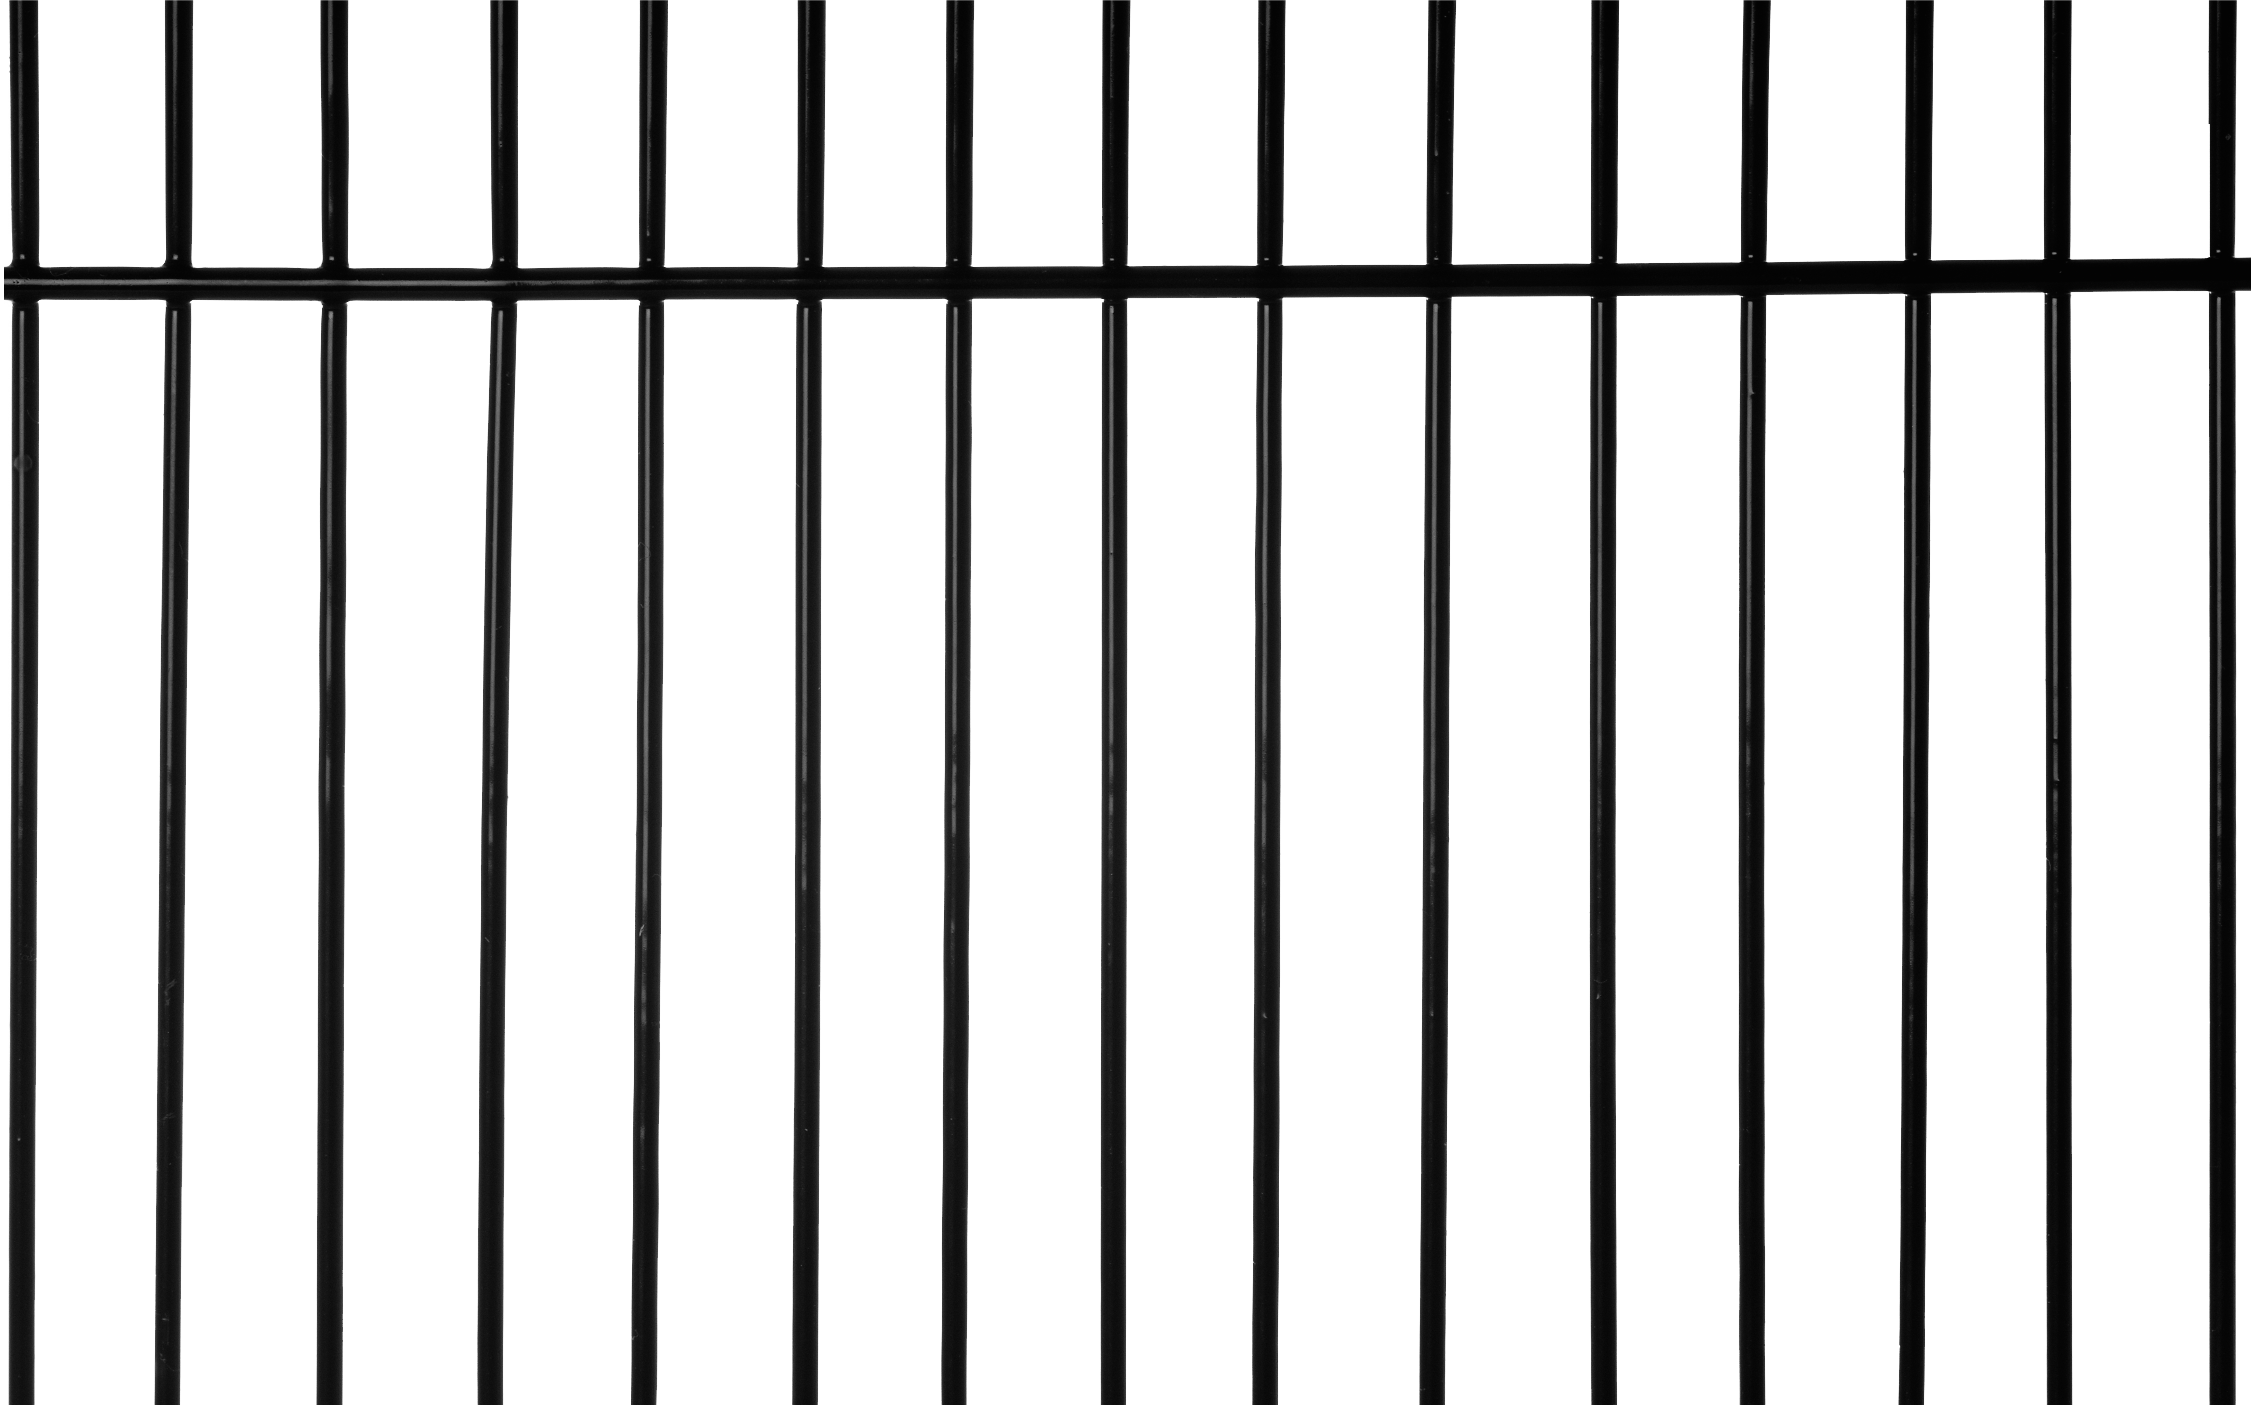 jail cell bars png